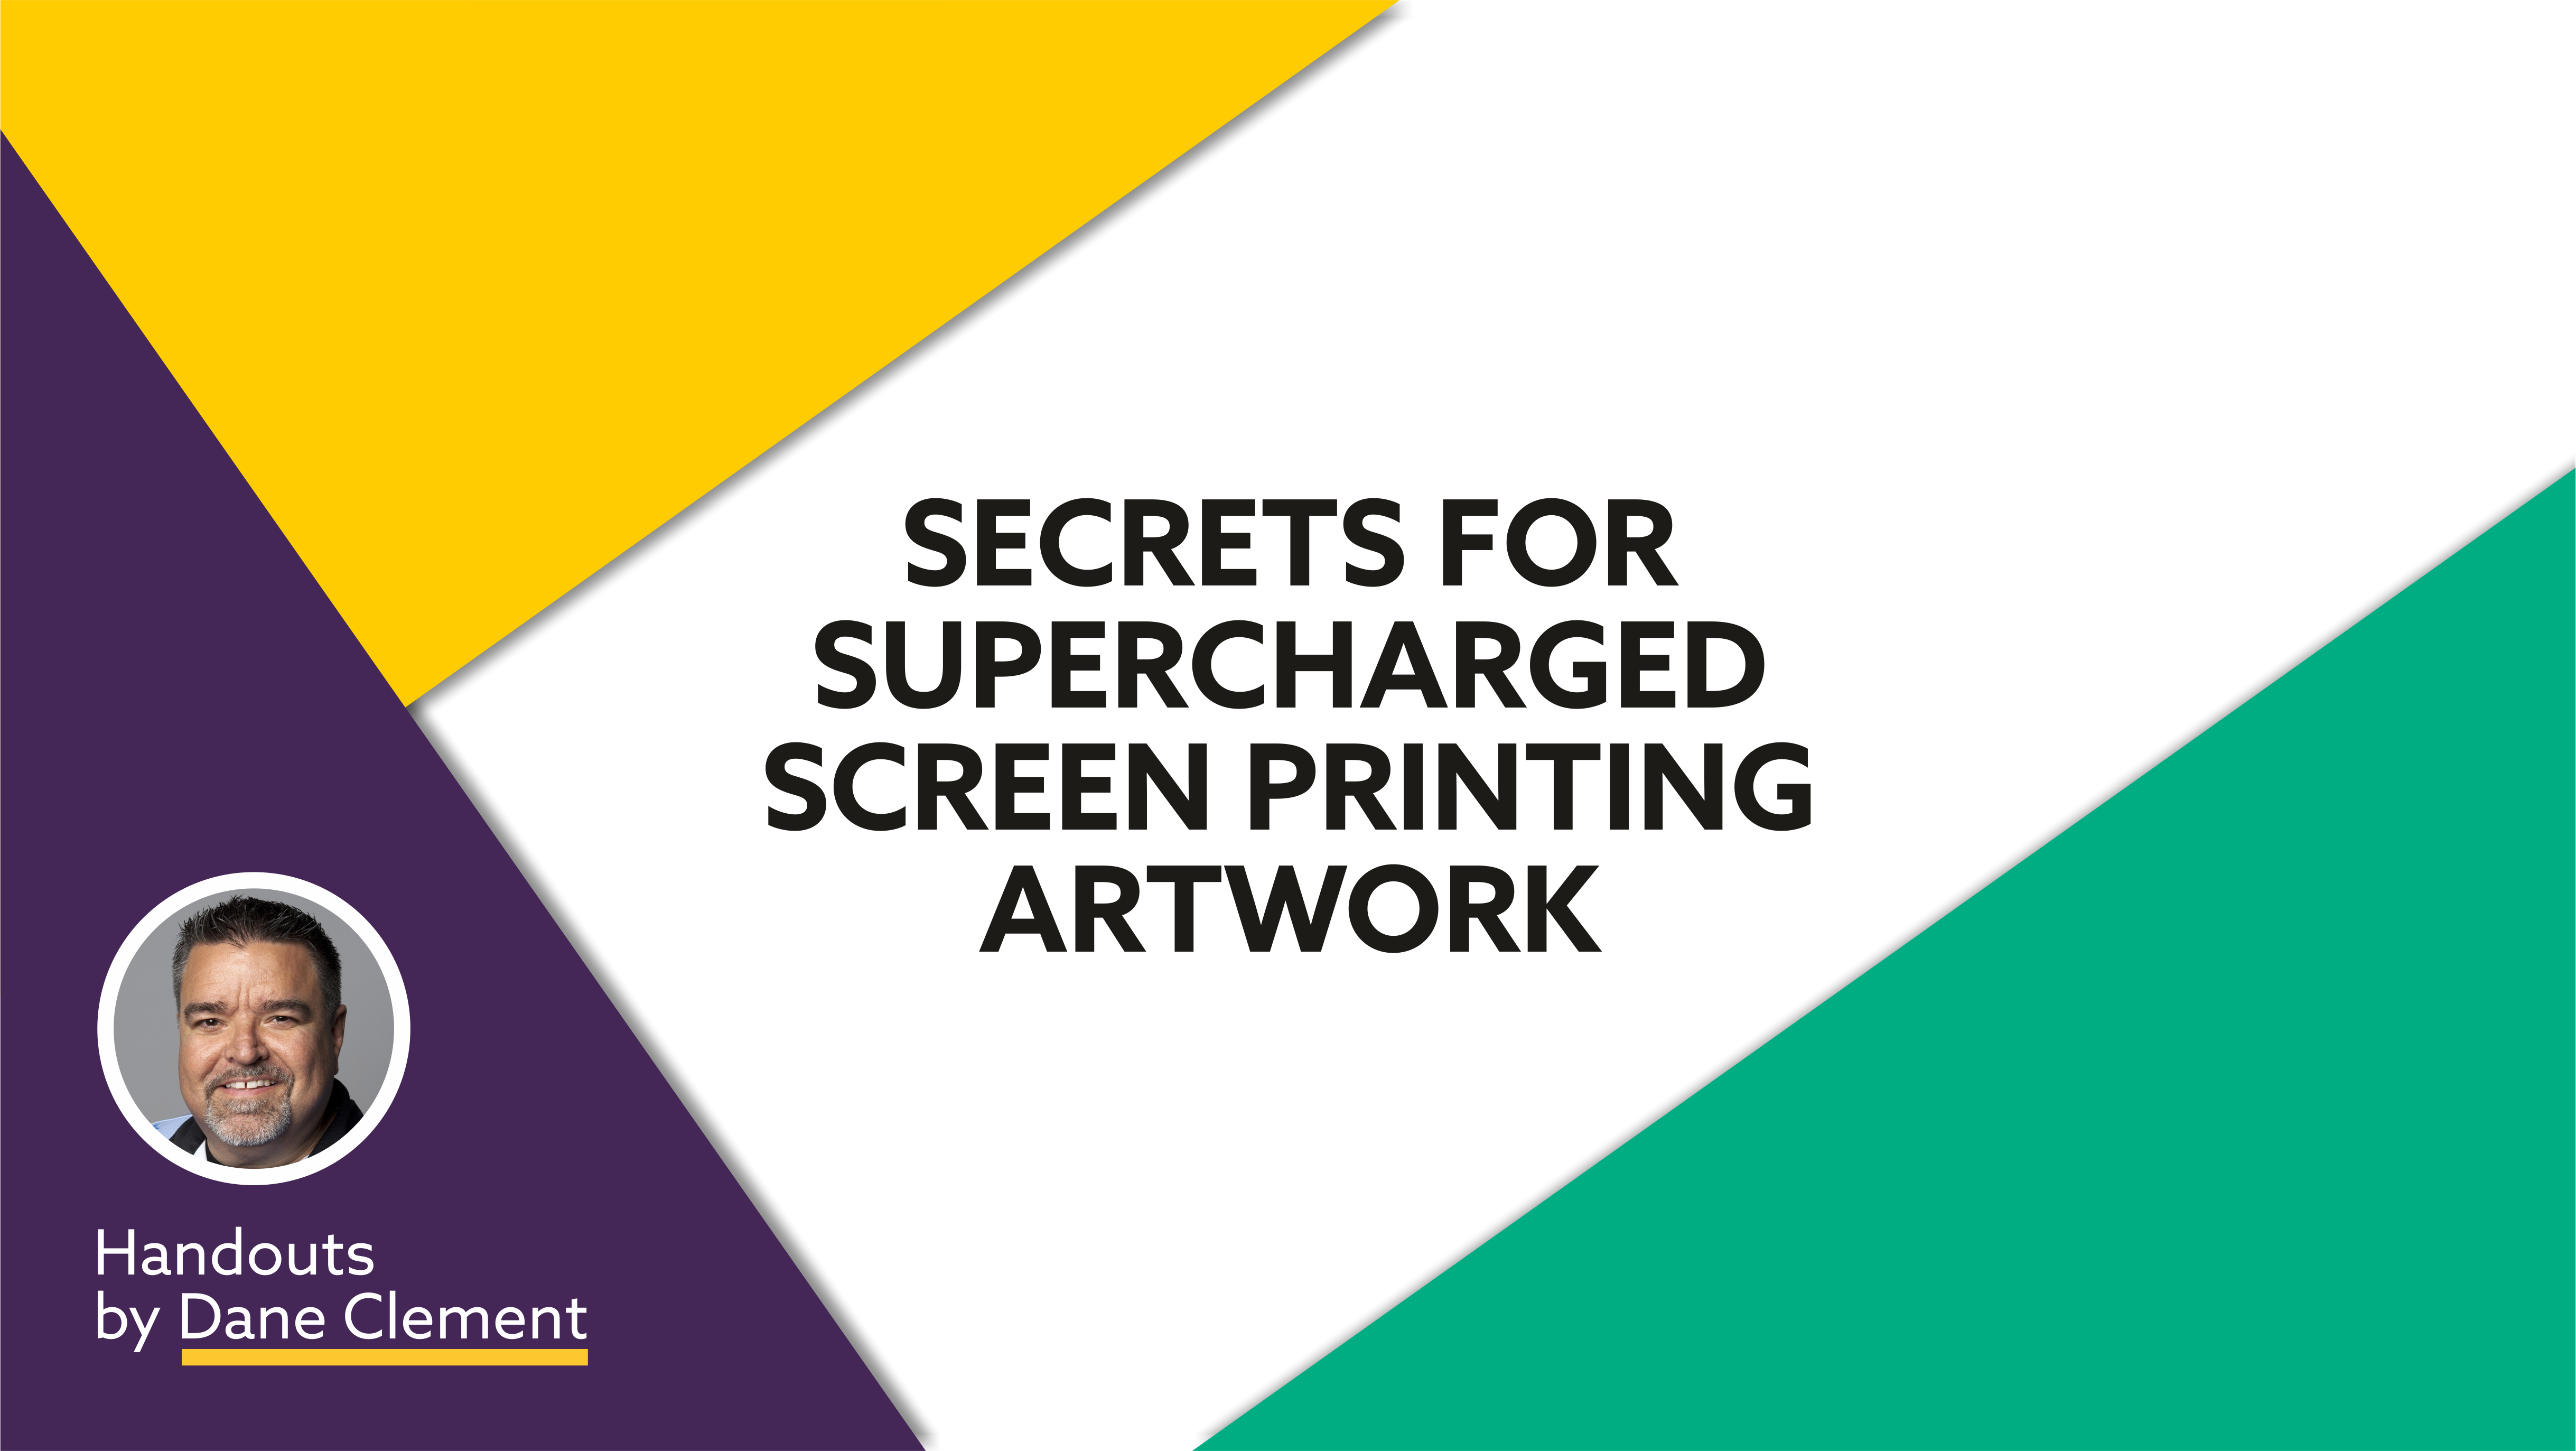 Secrets for Supercharged Screen Printing Artwork